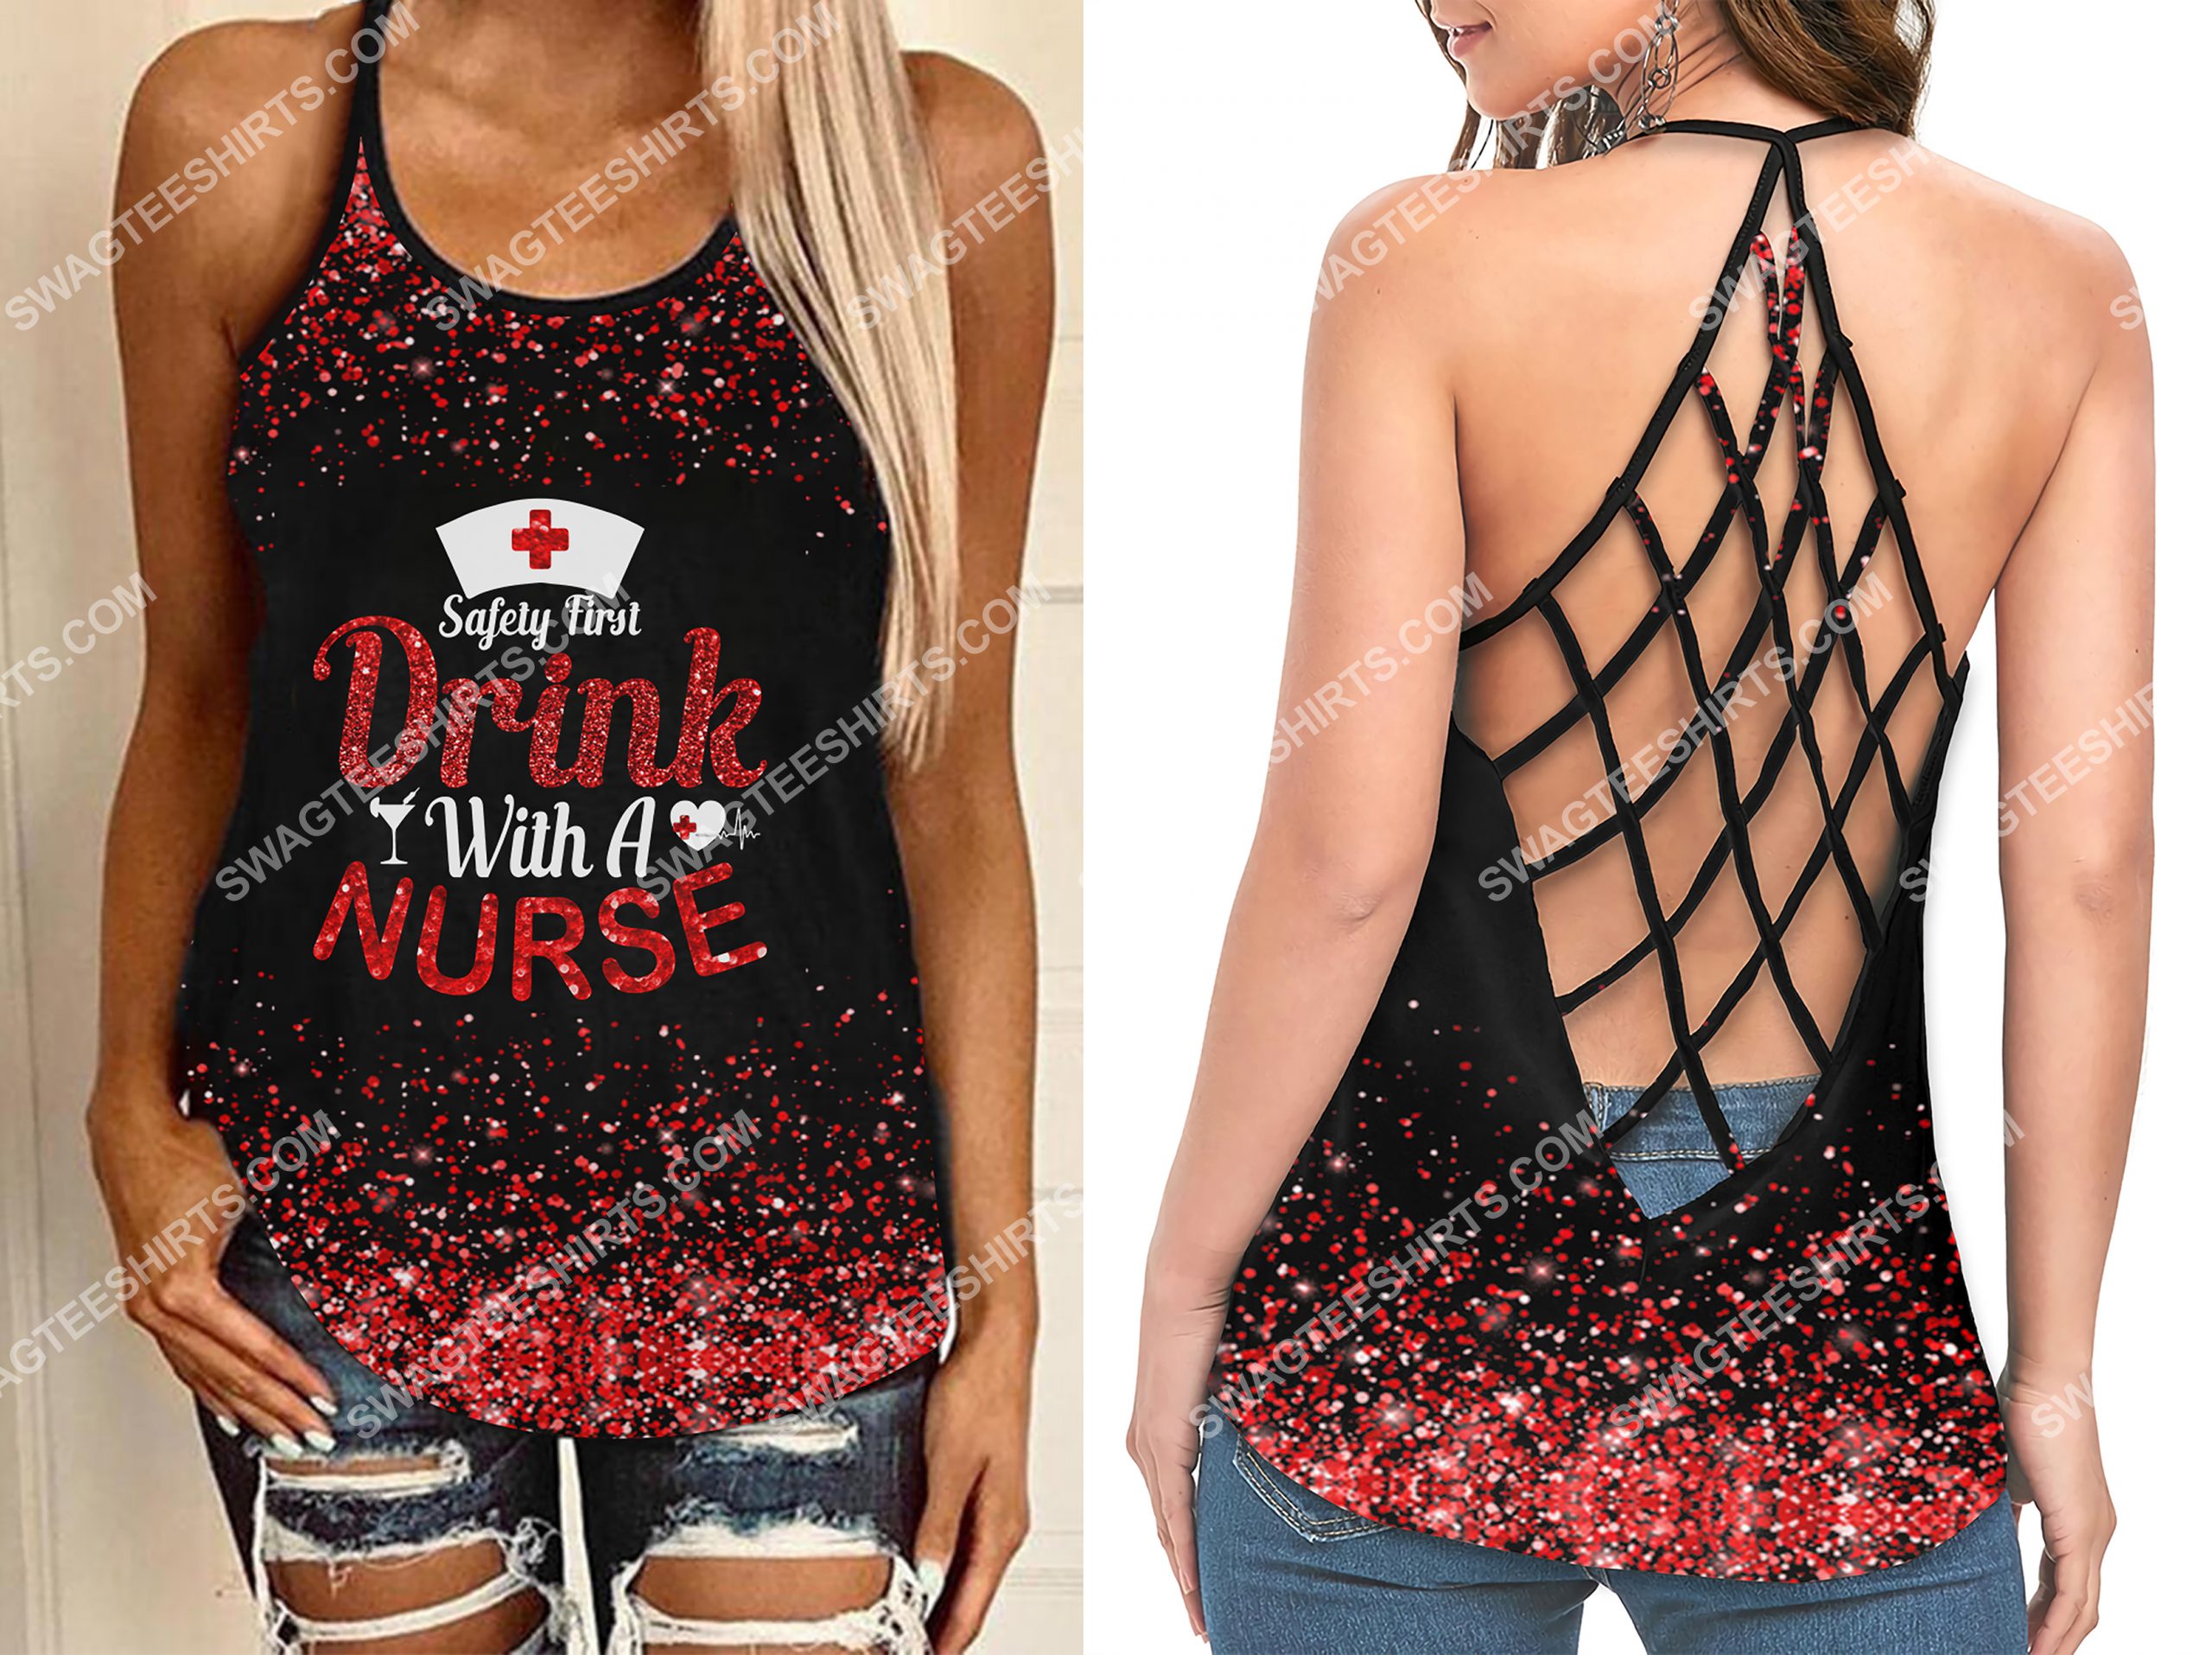 safety first drink with a nurse glitter strappy back tank top 2(1) - Copy